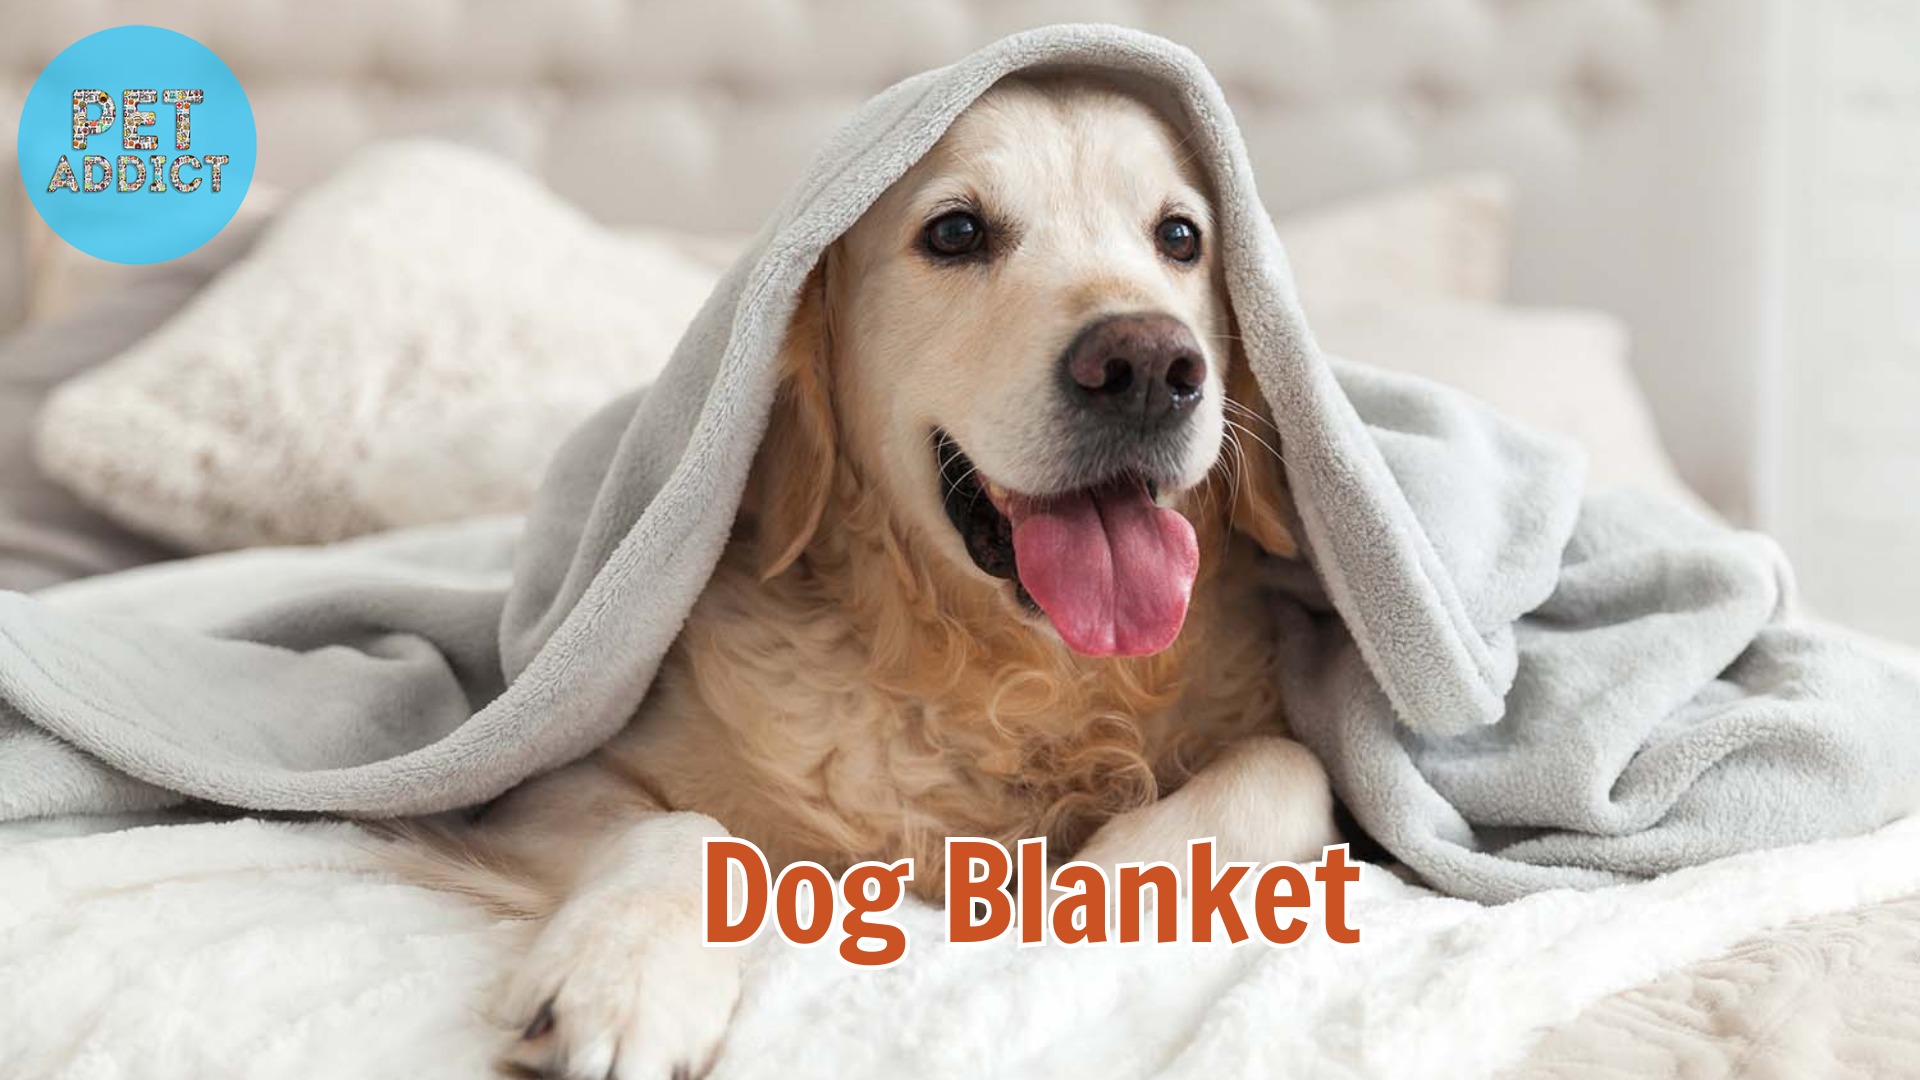 All About Dog Blanket